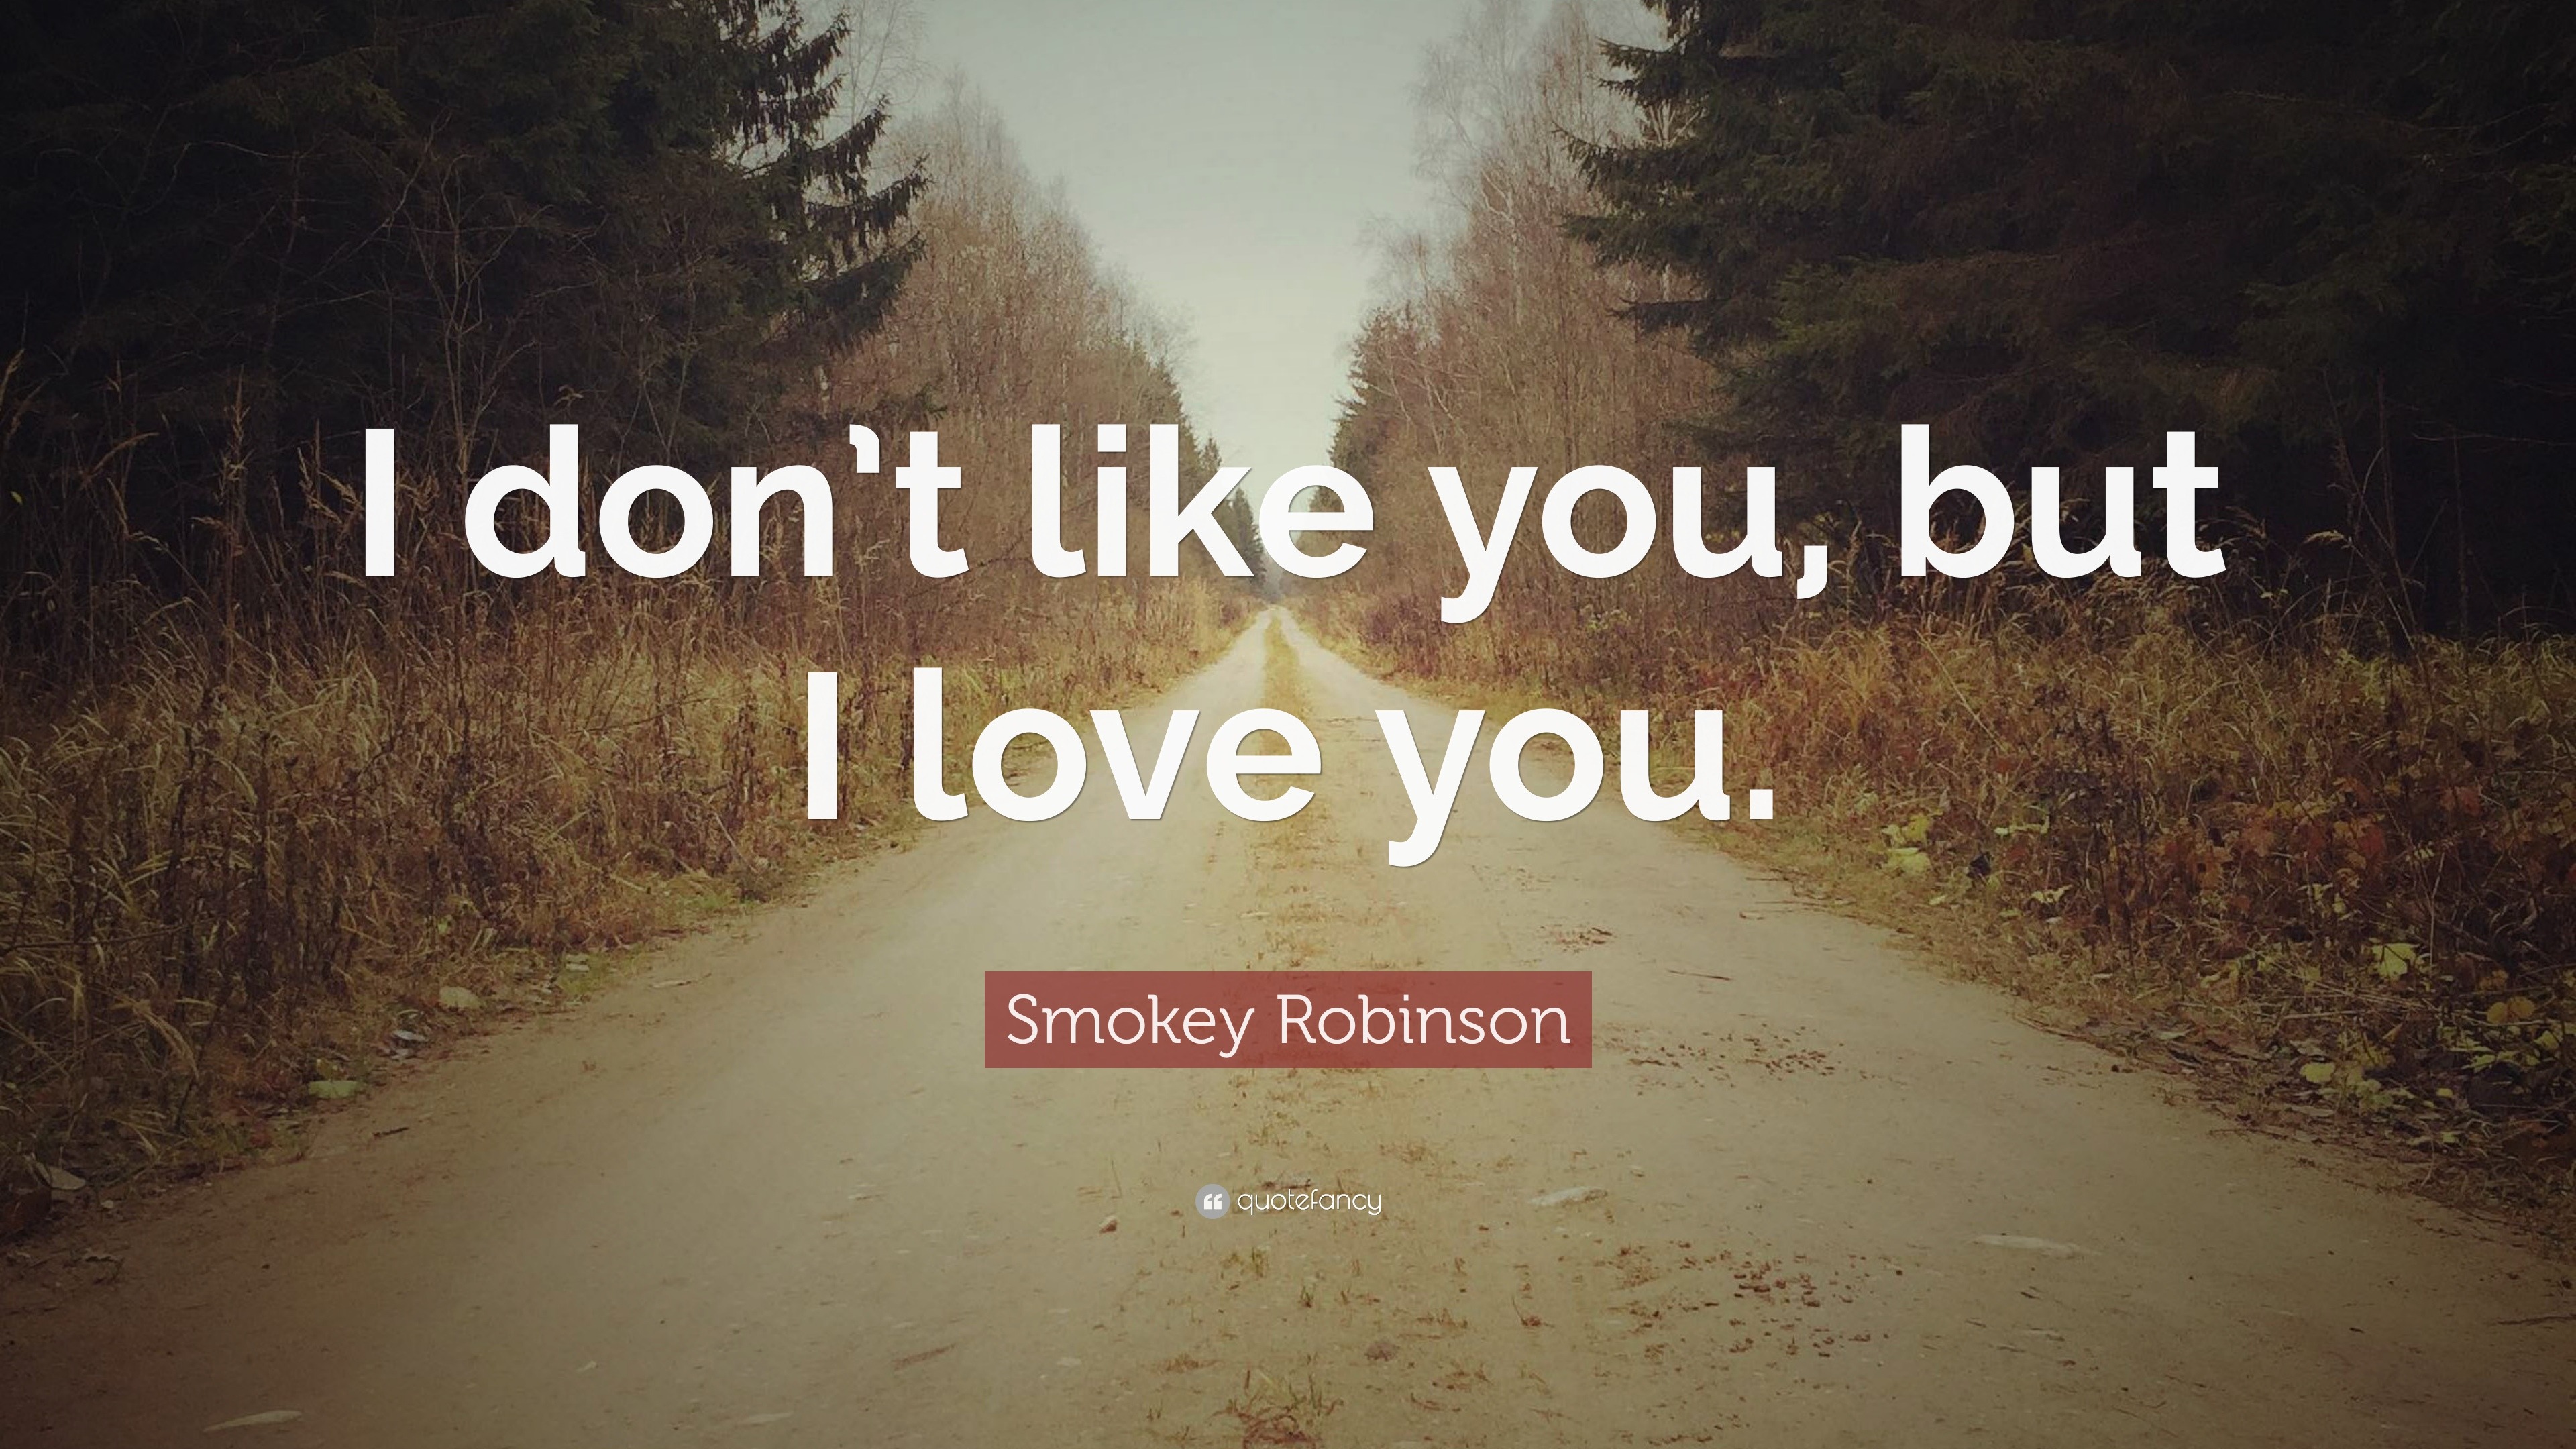 Smokey Robinson Quote “I don t like you but I love you